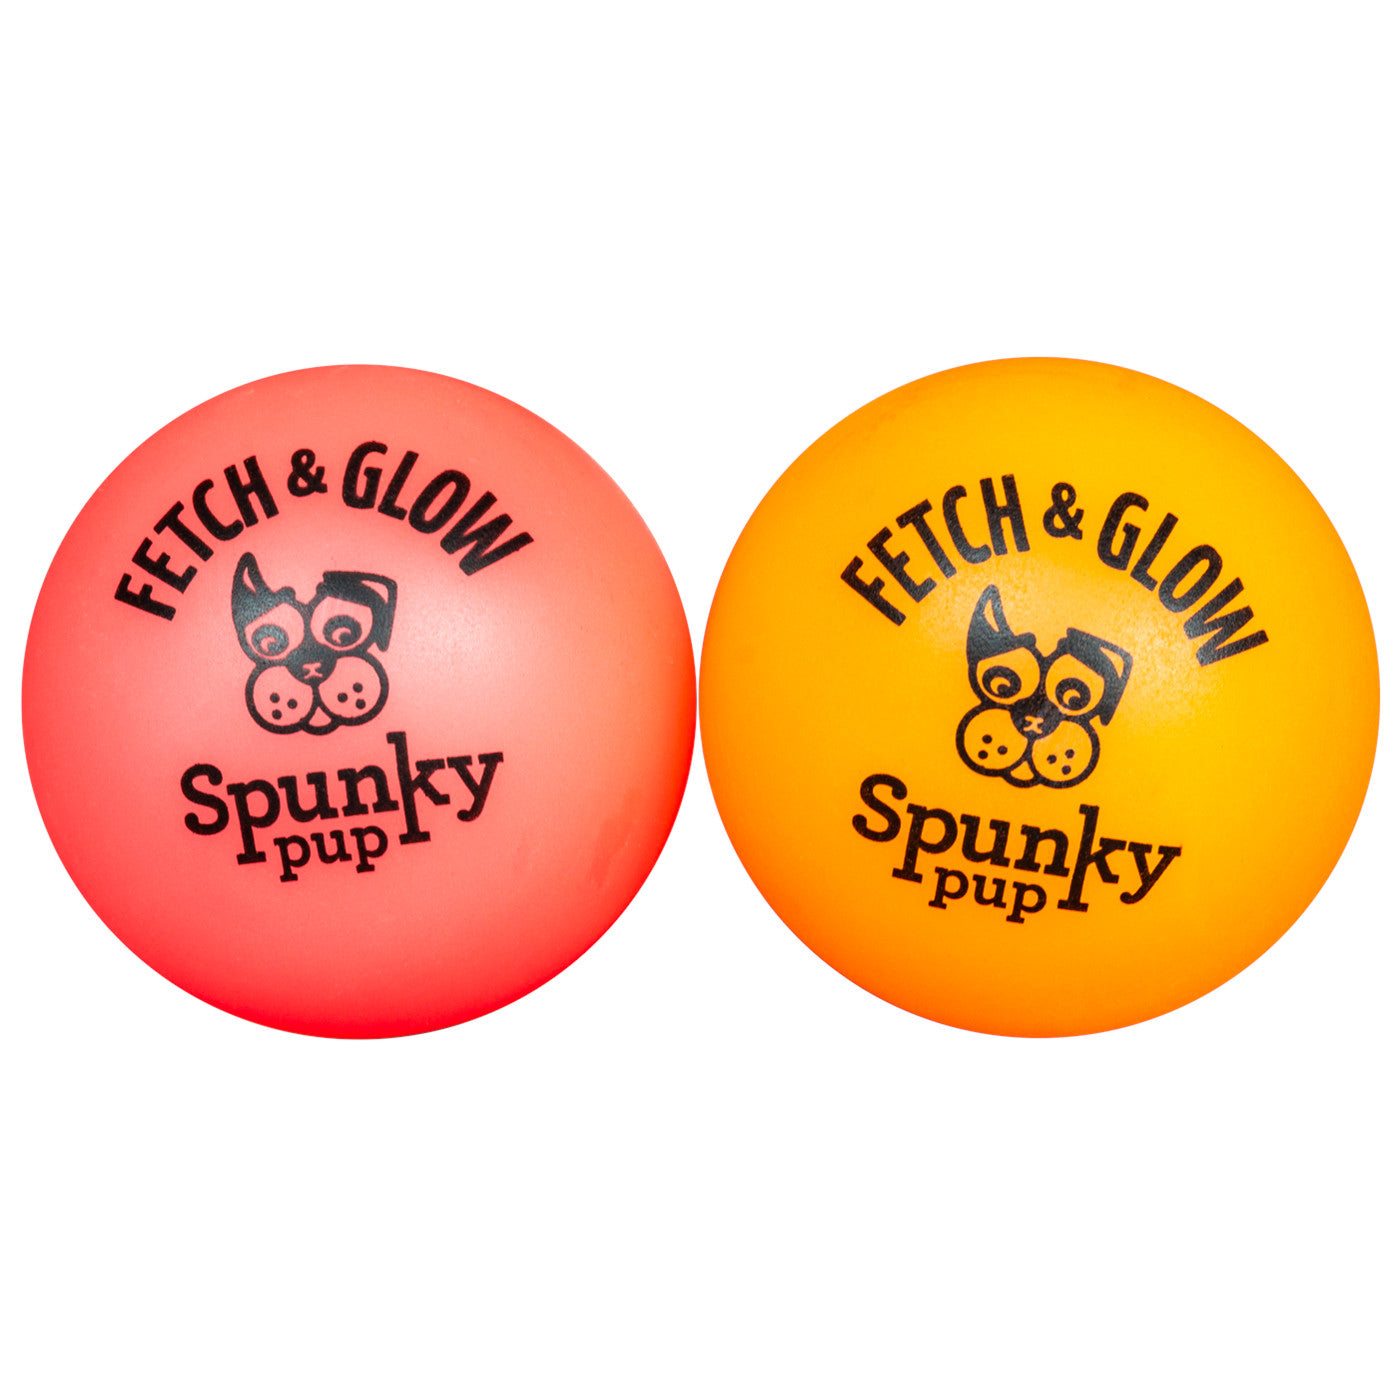 Spunky Pup Fetch & Glow Dog Ball, Indoor or Outdoor Play